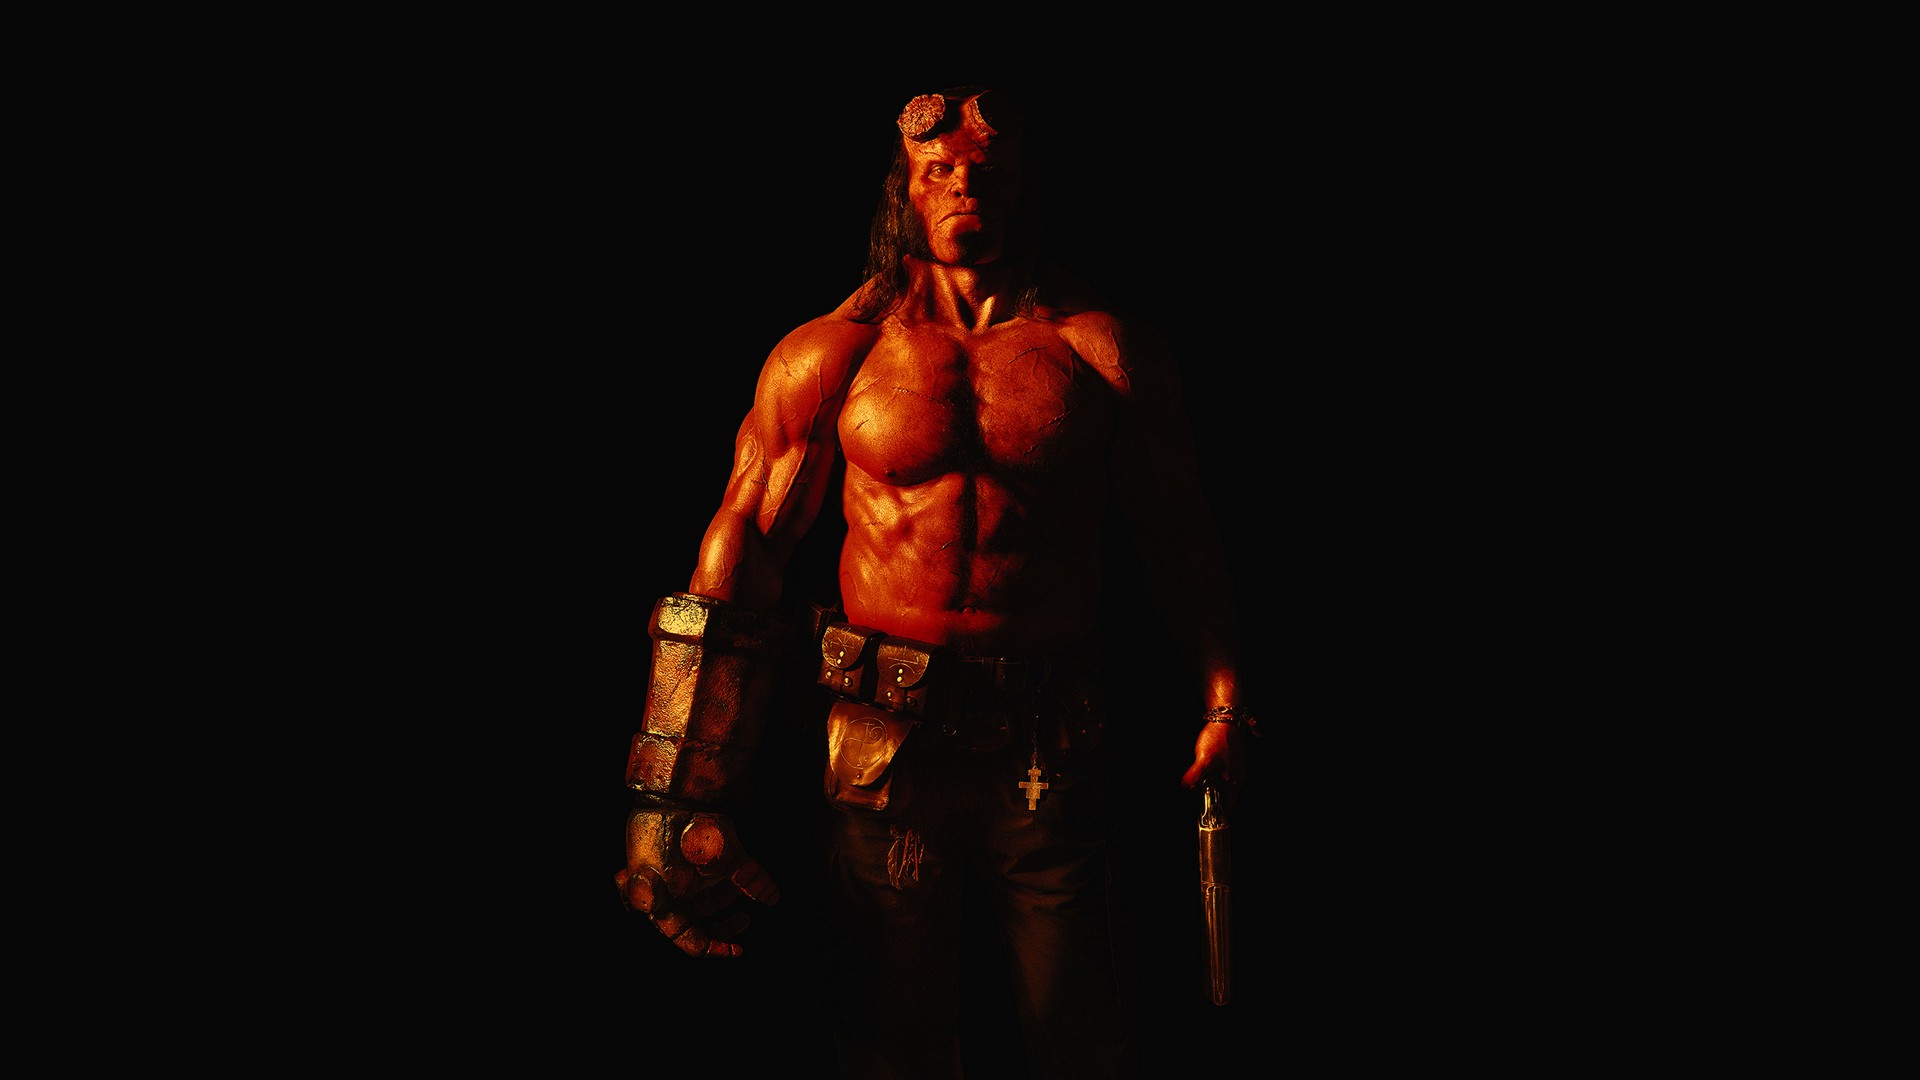 Hellboy 2019 Poster Wallpaper with high-resolution 1920x1080 pixel. You can use this poster wallpaper for your Desktop Computers, Mac Screensavers, Windows Backgrounds, iPhone Wallpapers, Tablet or Android Lock screen and another Mobile device